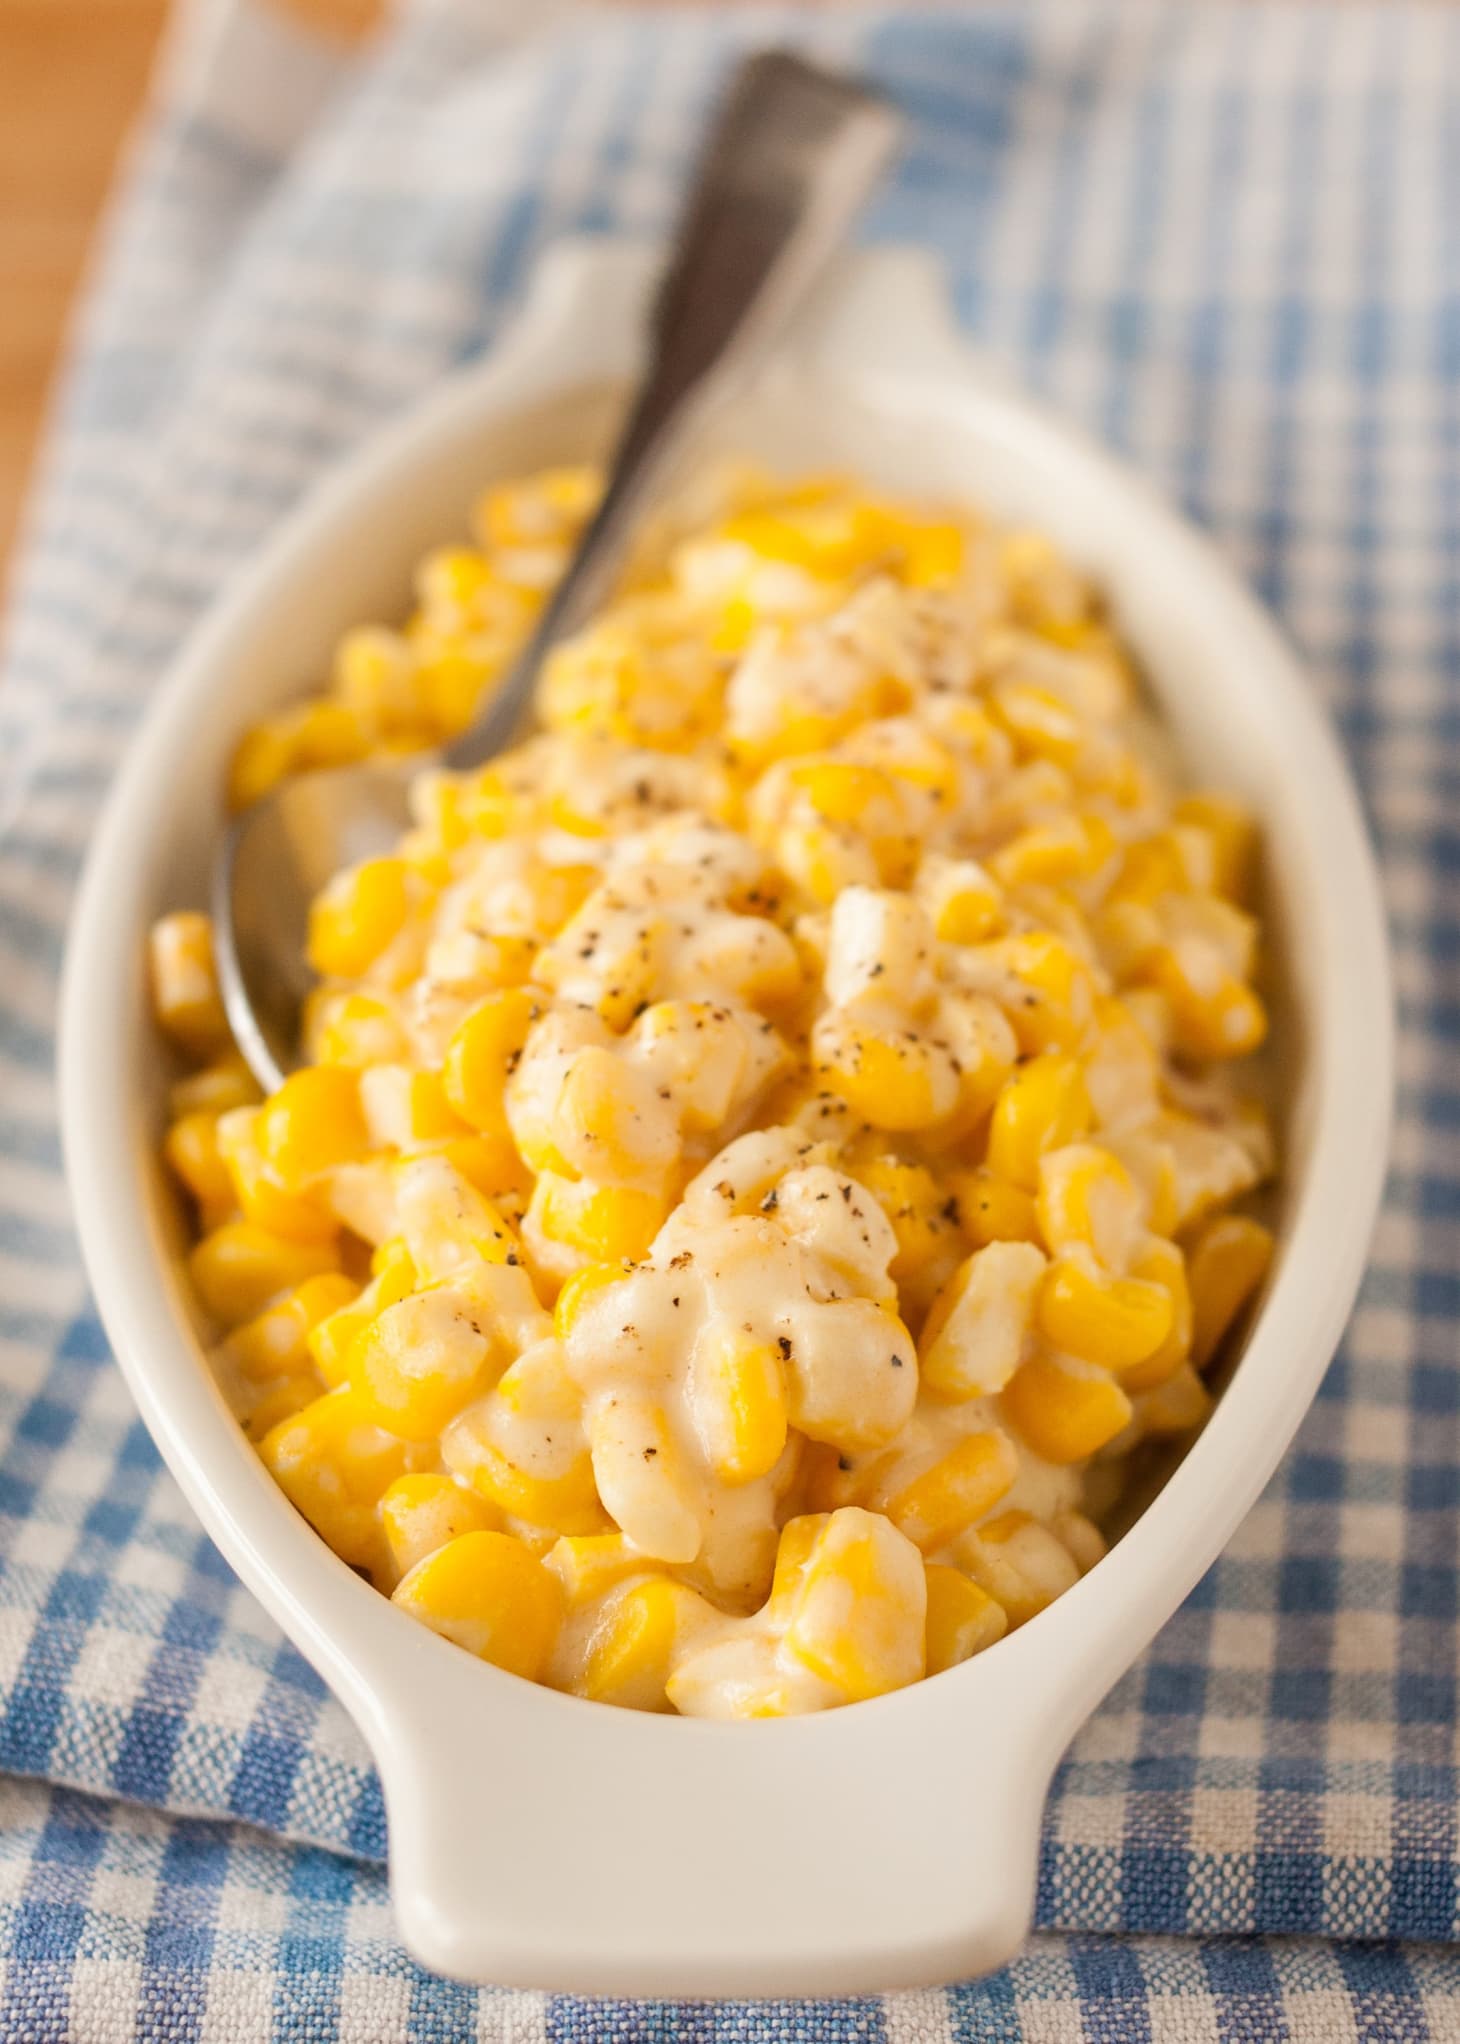 How To Make Slow Cooker Creamed Corn - Recipe | Kitchn